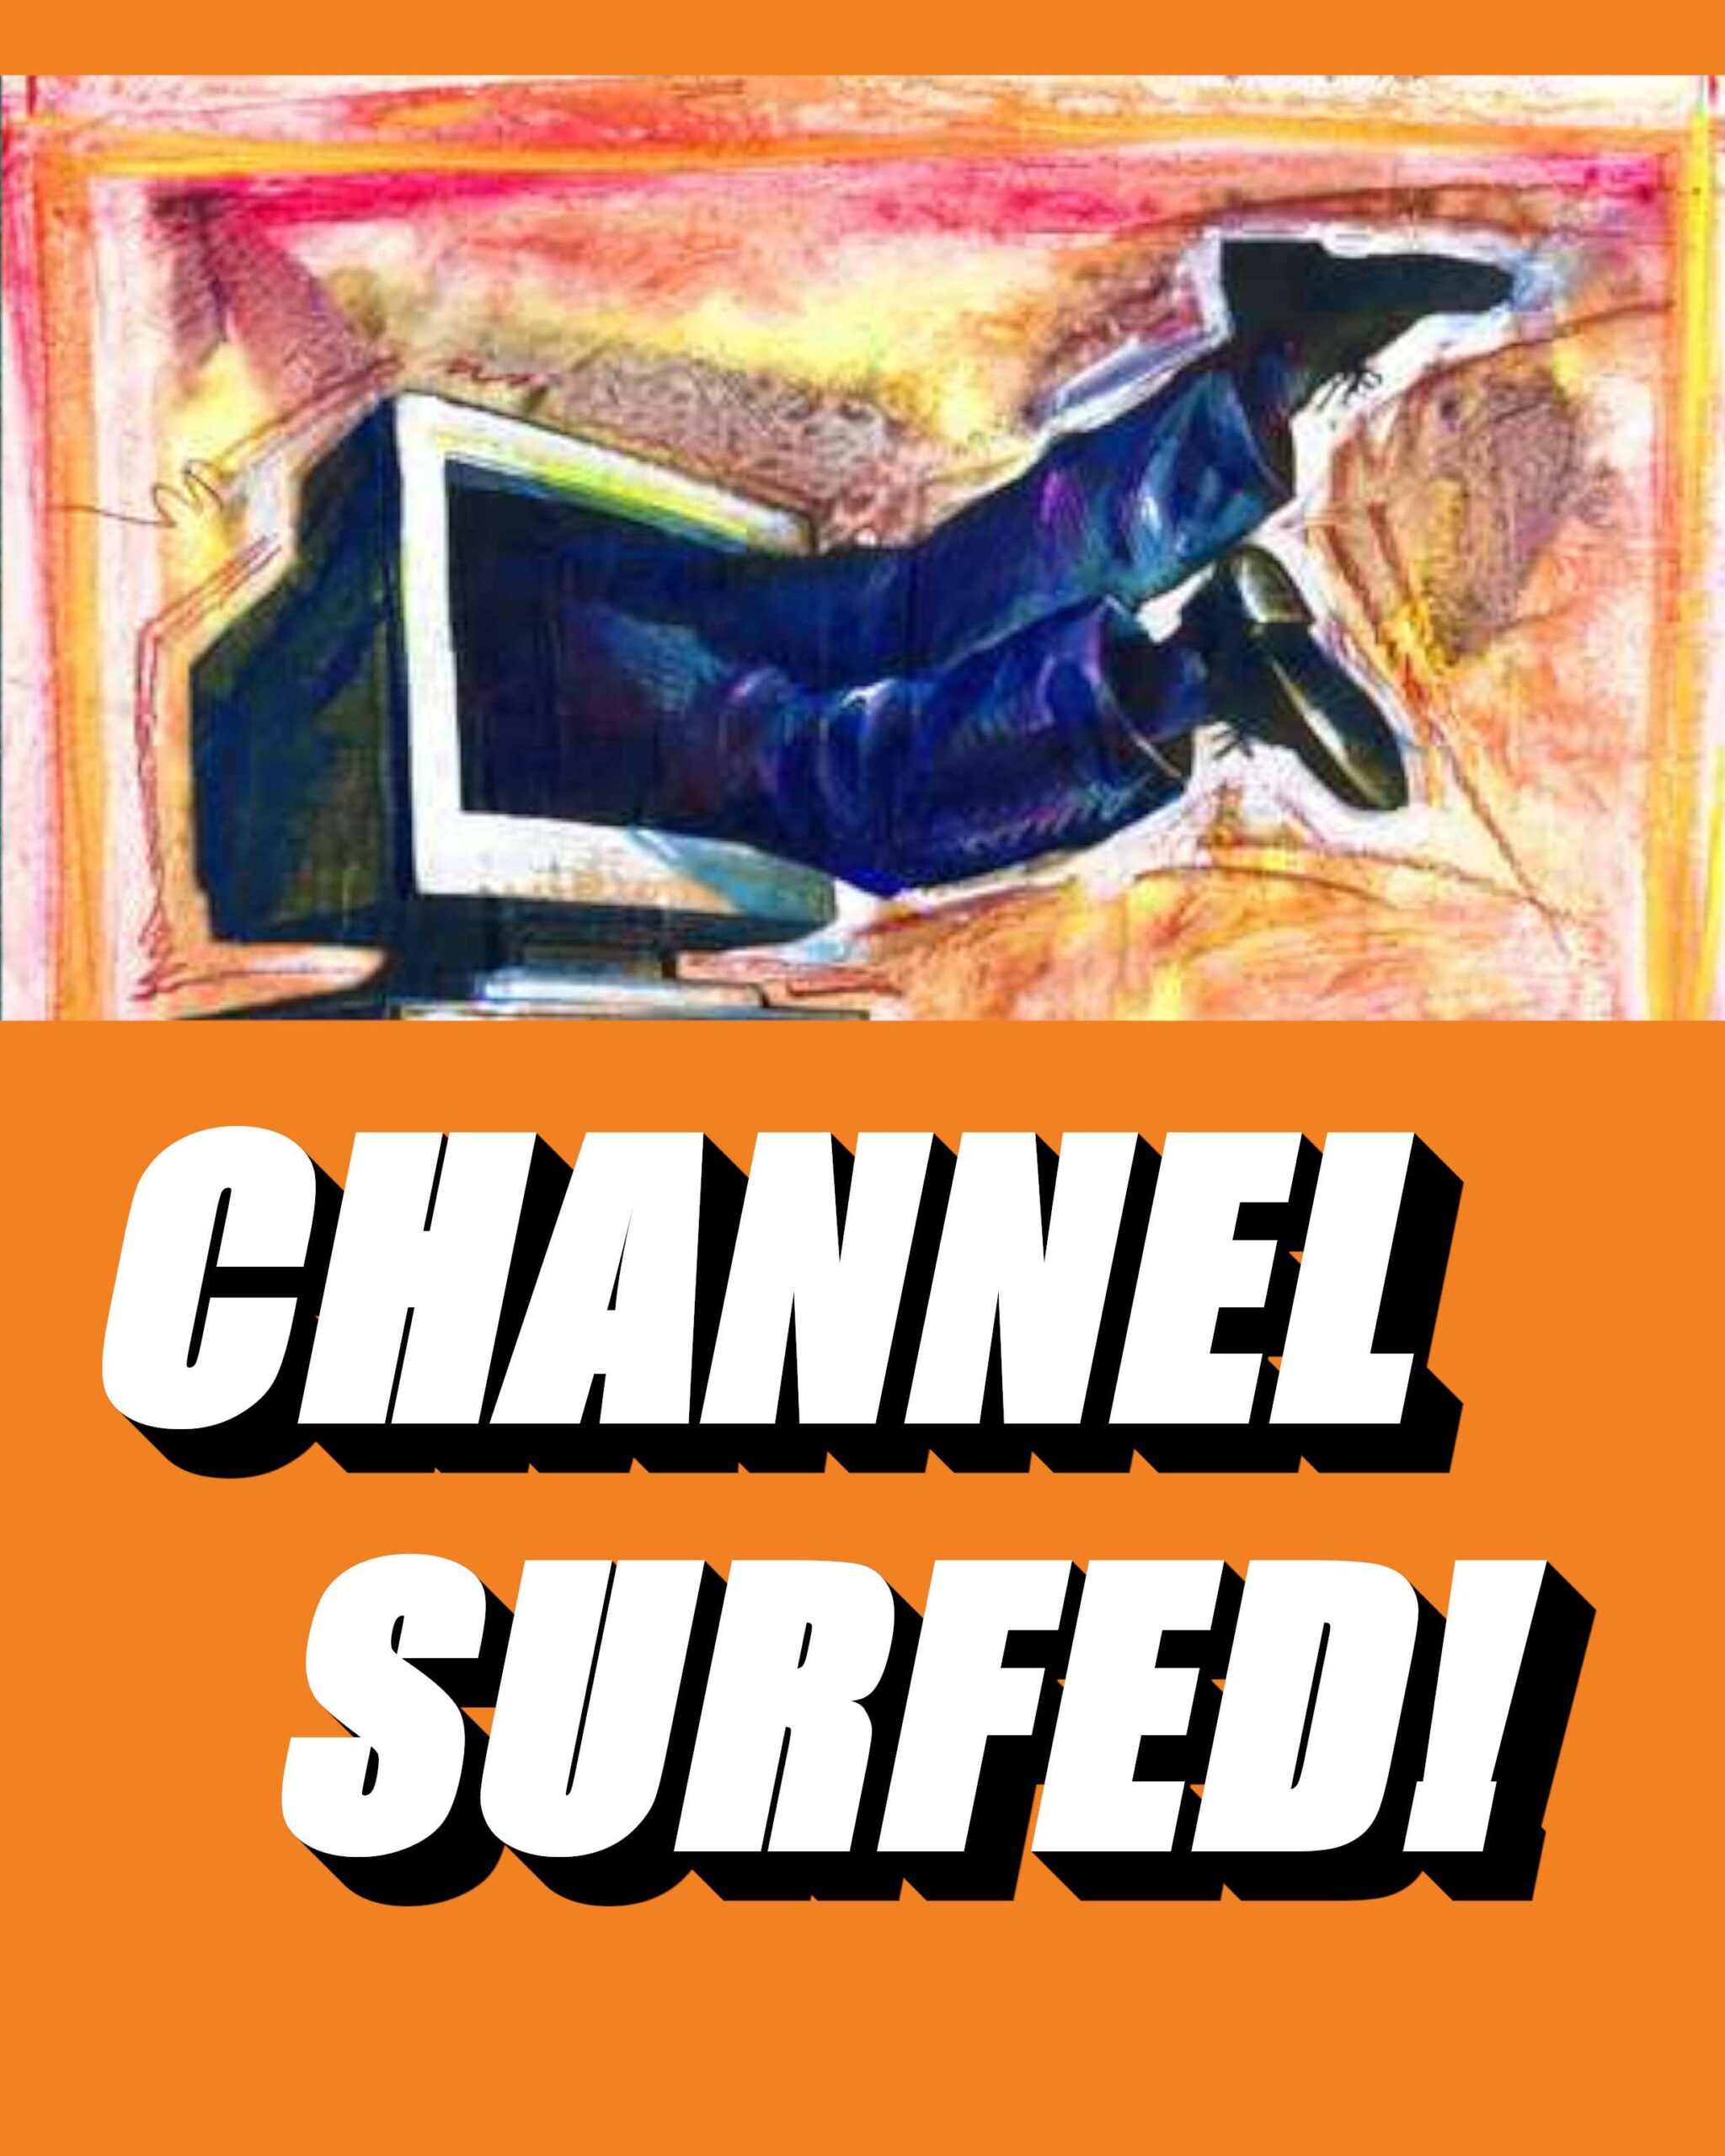 Channel Surfed! A Comedy about Cable TV going wrong.....